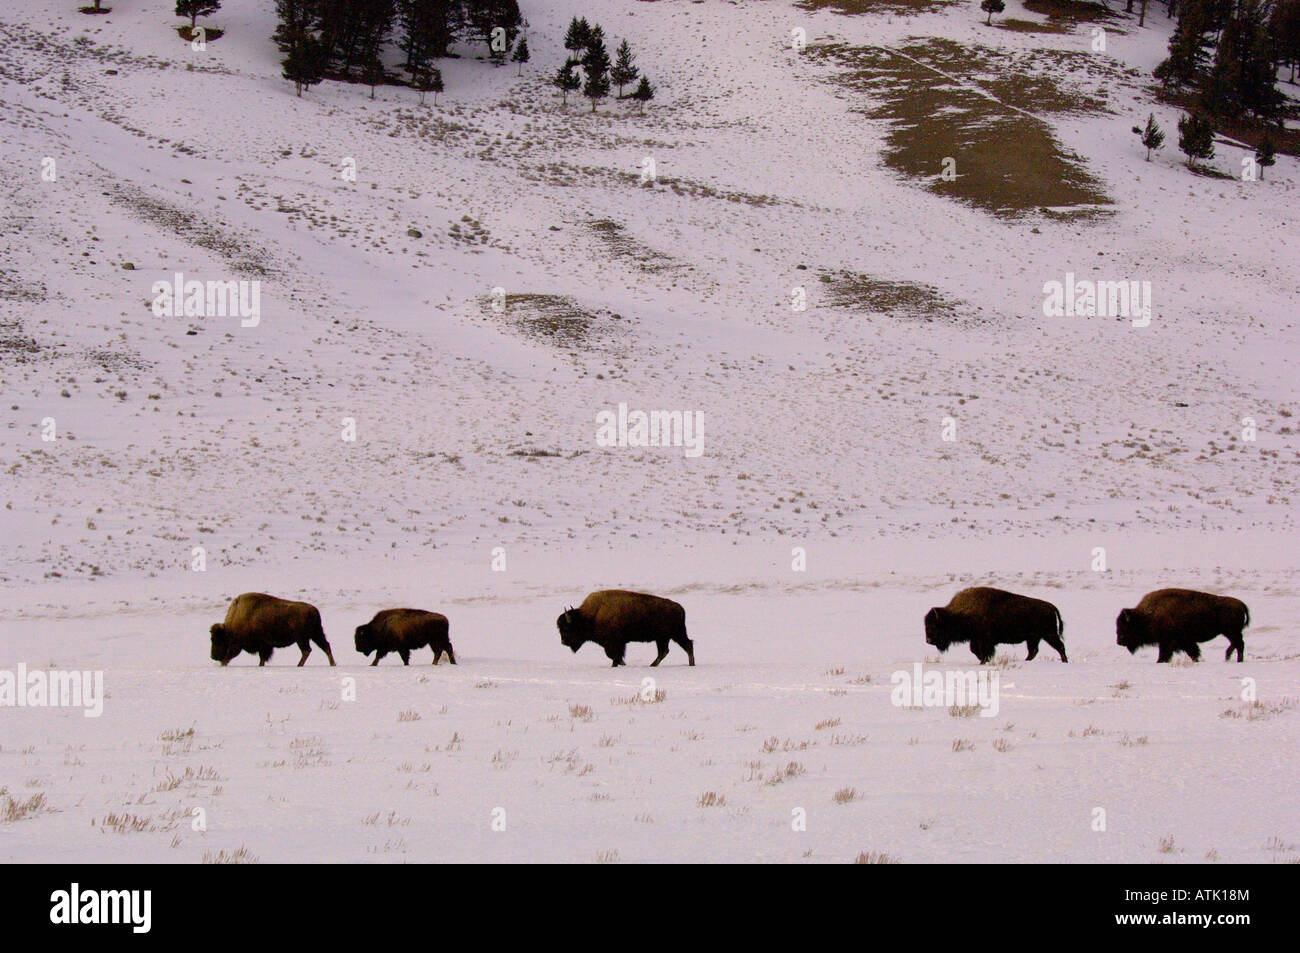 American  Buffalo OR Bison, Bison bison, migrating In snow. Photographed in Yellowstone National Park USA Stock Photo